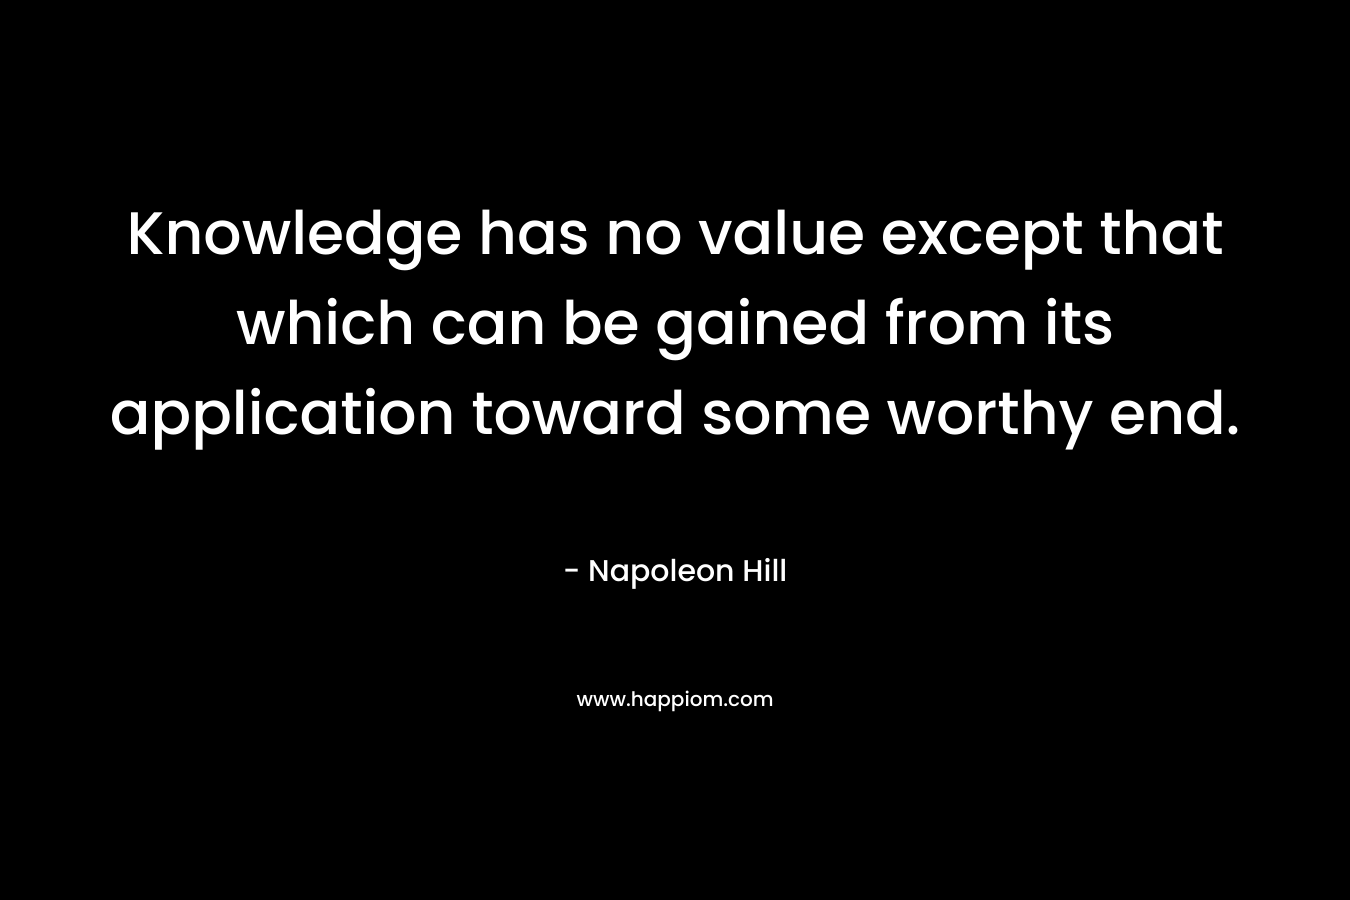 Knowledge has no value except that which can be gained from its application toward some worthy end. – Napoleon Hill